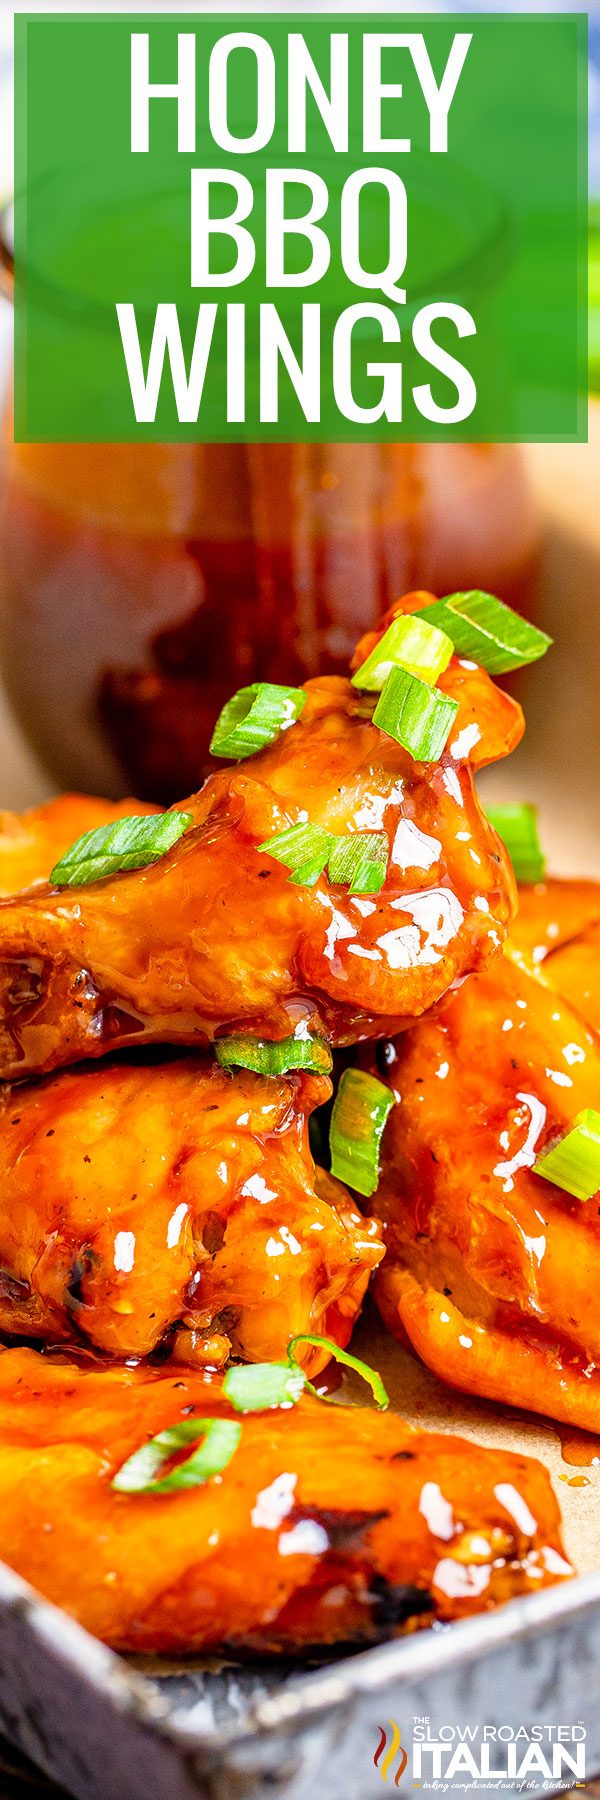 titled image (and shown): honey bbq wings air fryer or oven 